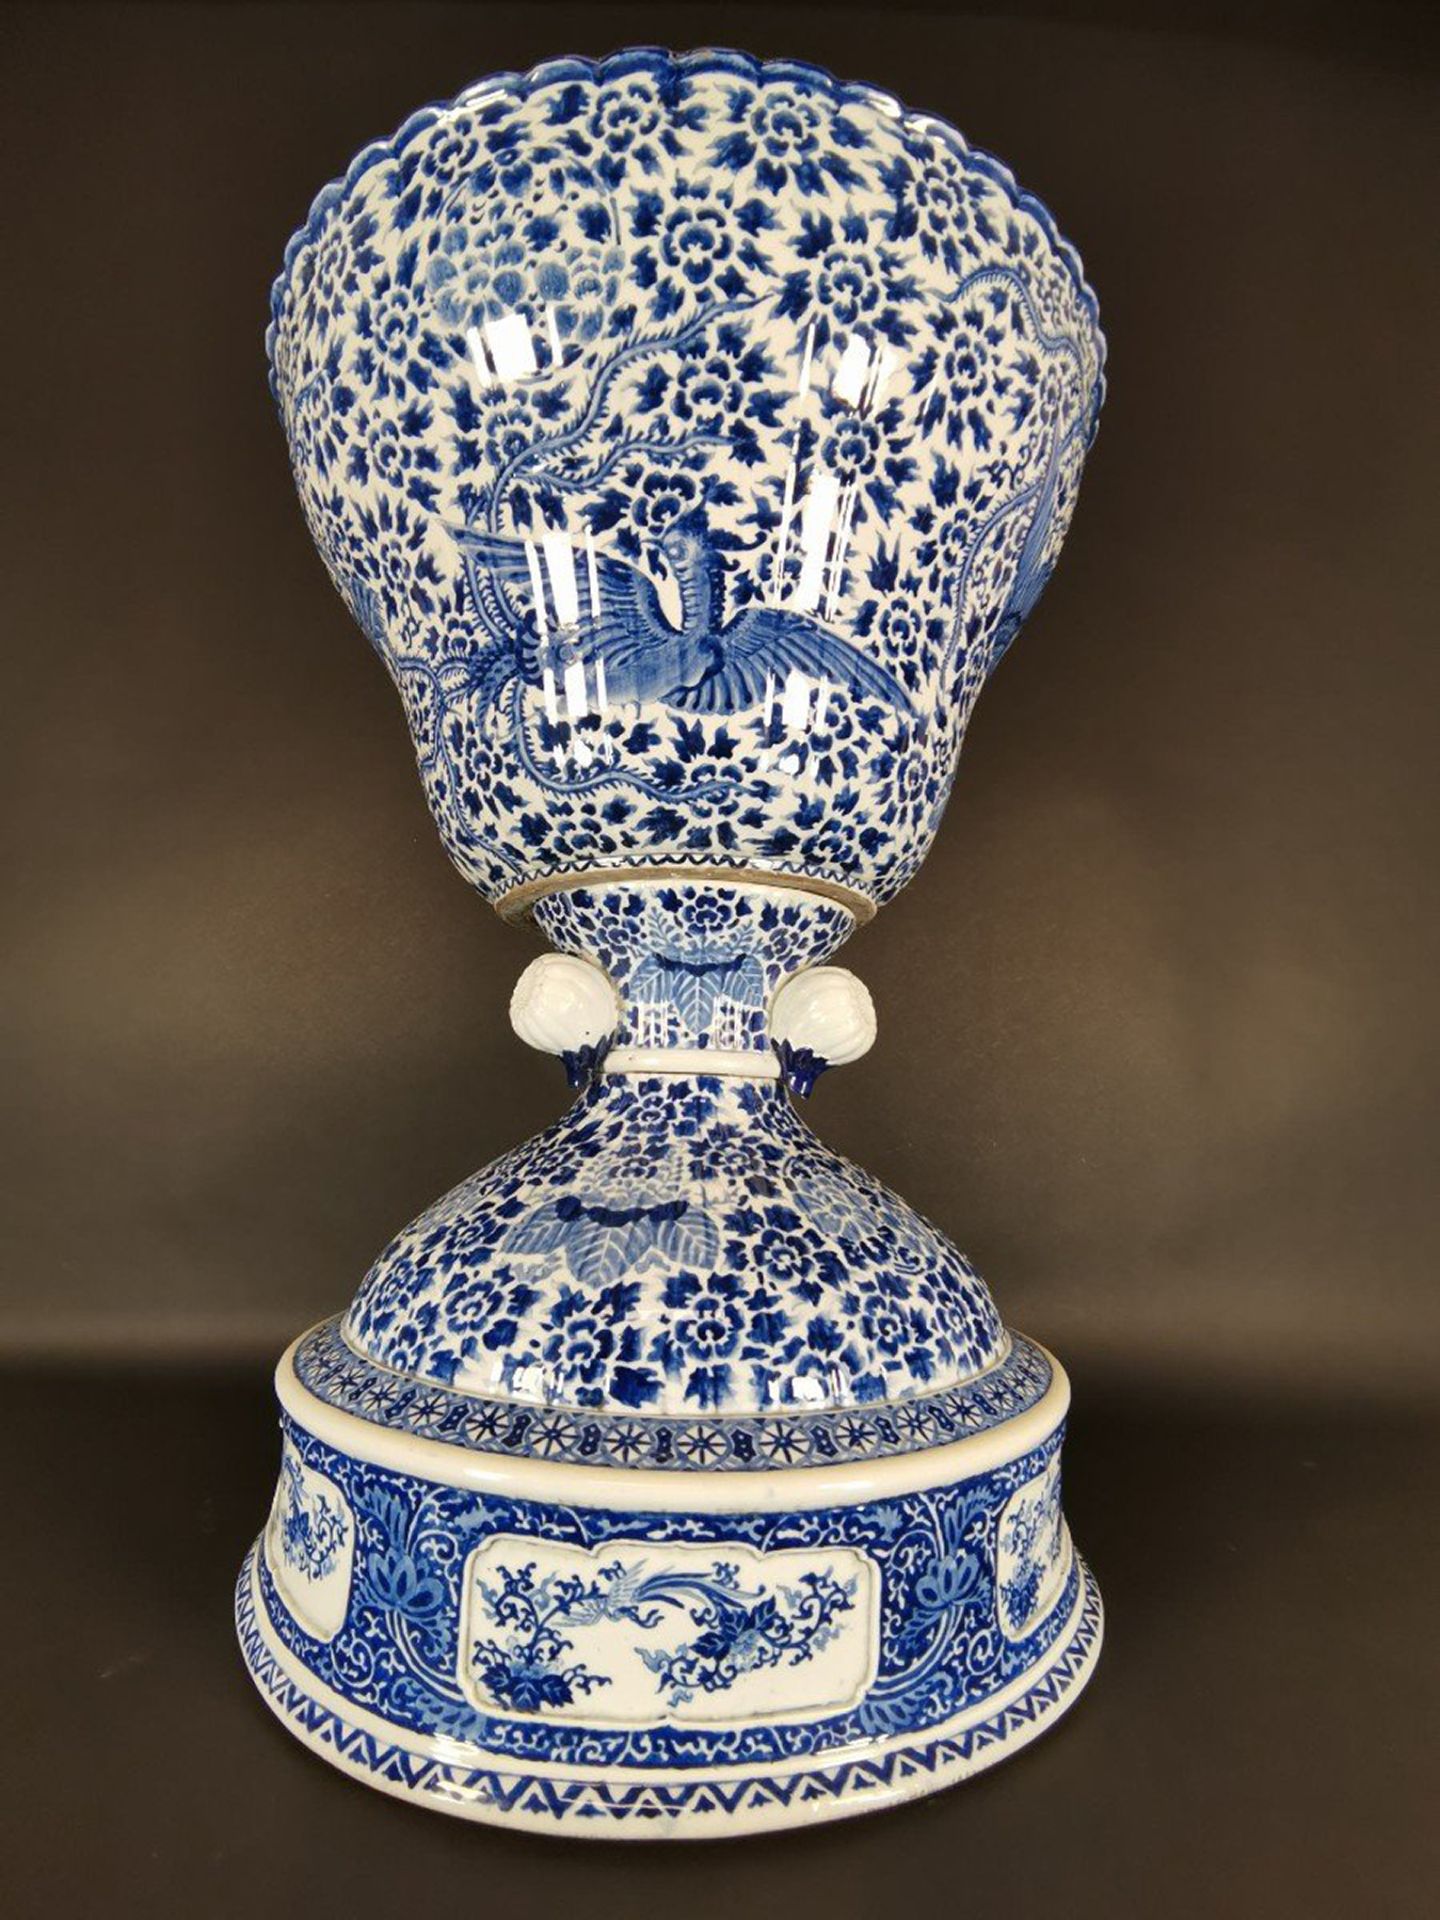 LARGE 19TH CENTURY VASE IN CHINESE PORCELAIN - Image 2 of 5